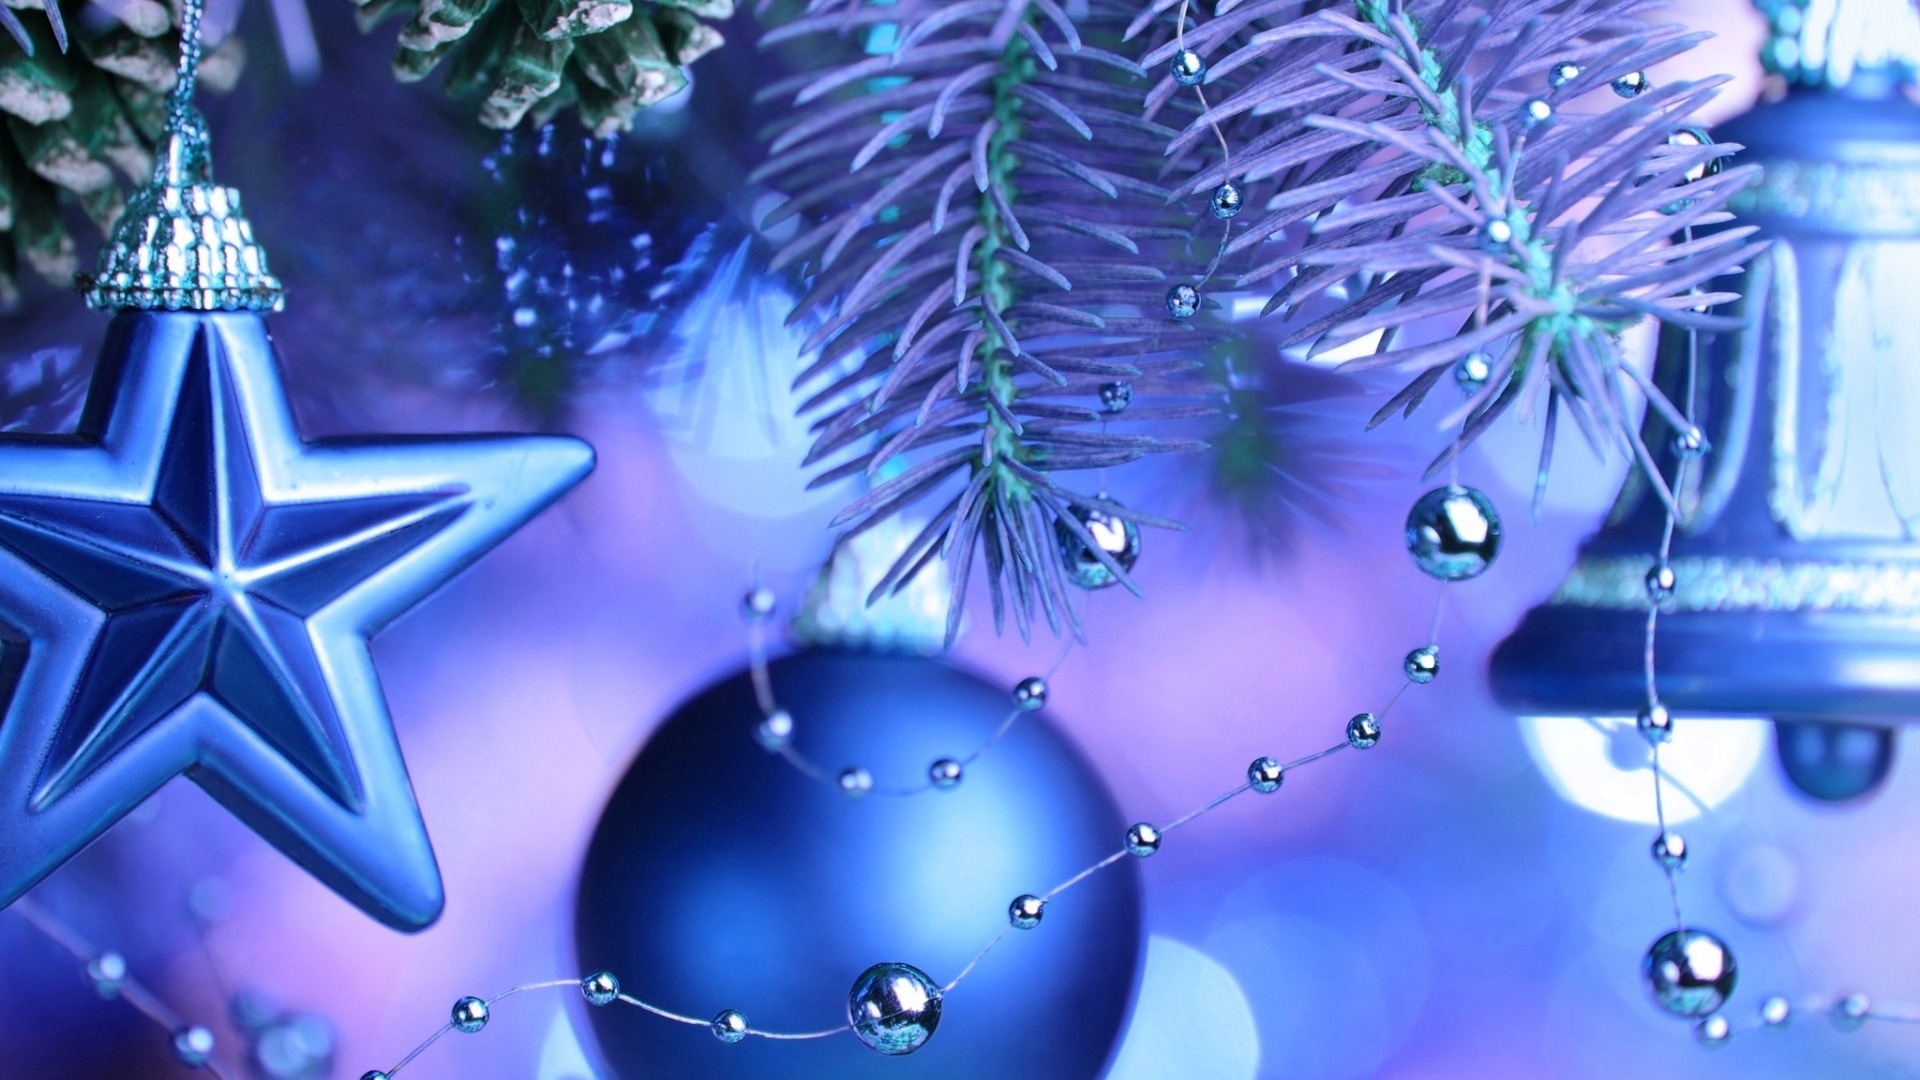 Cool Blue Christmas Ornaments  for 1920 x 1080 HDTV 1080p resolution